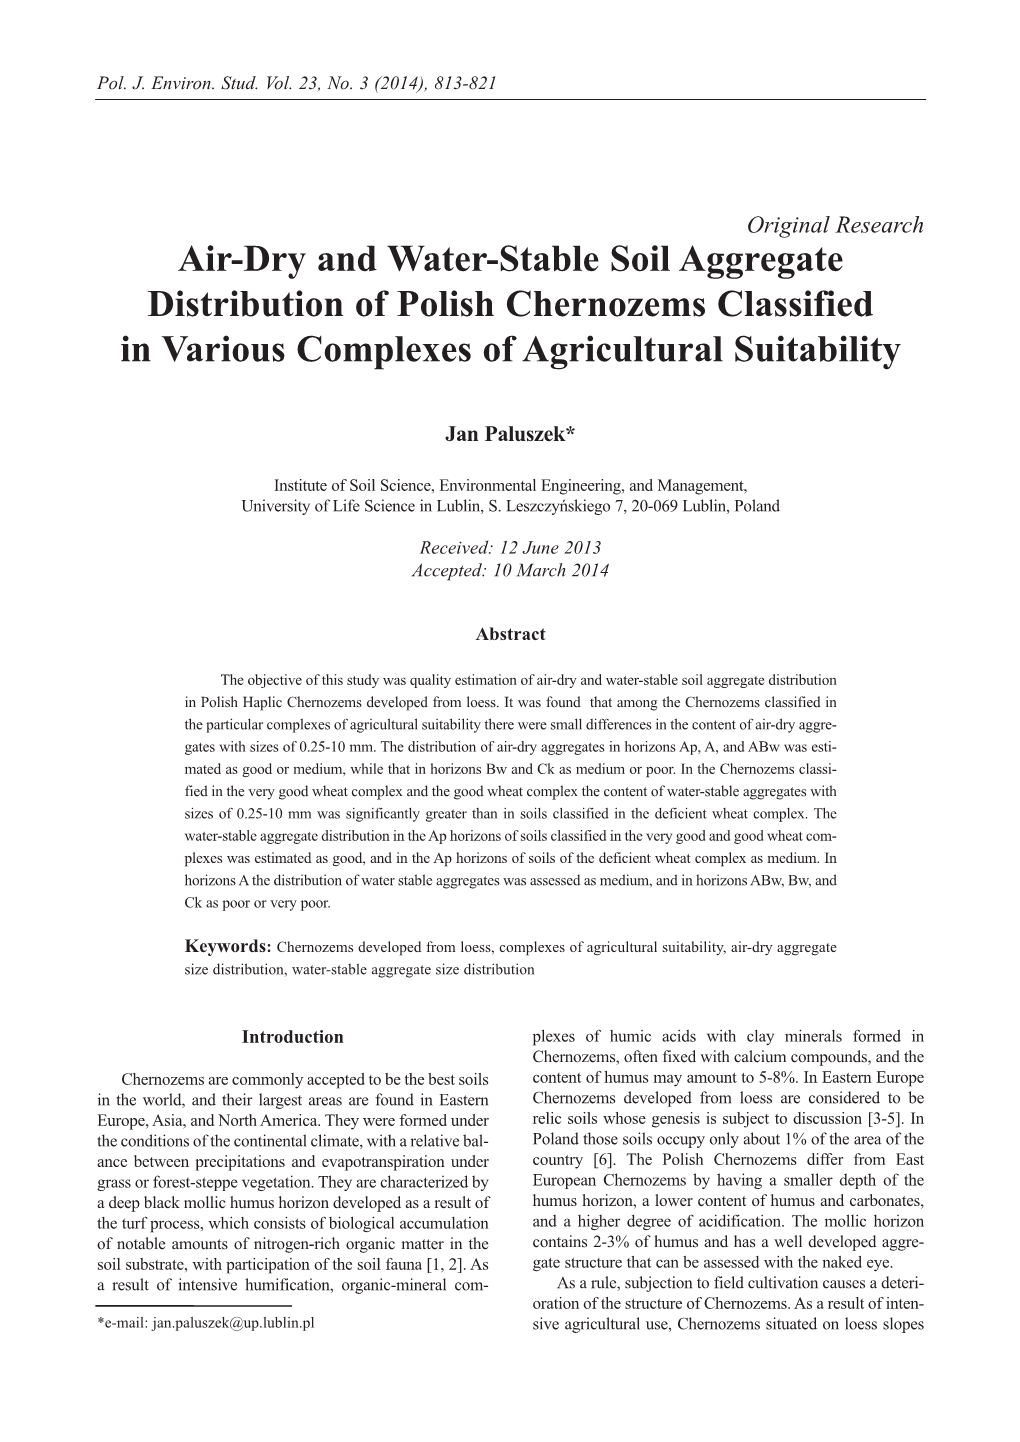 Air-Dry and Water-Stable Soil Aggregate Distribution of Polish Chernozems Classified in Various Complexes of Agricultural Suitability